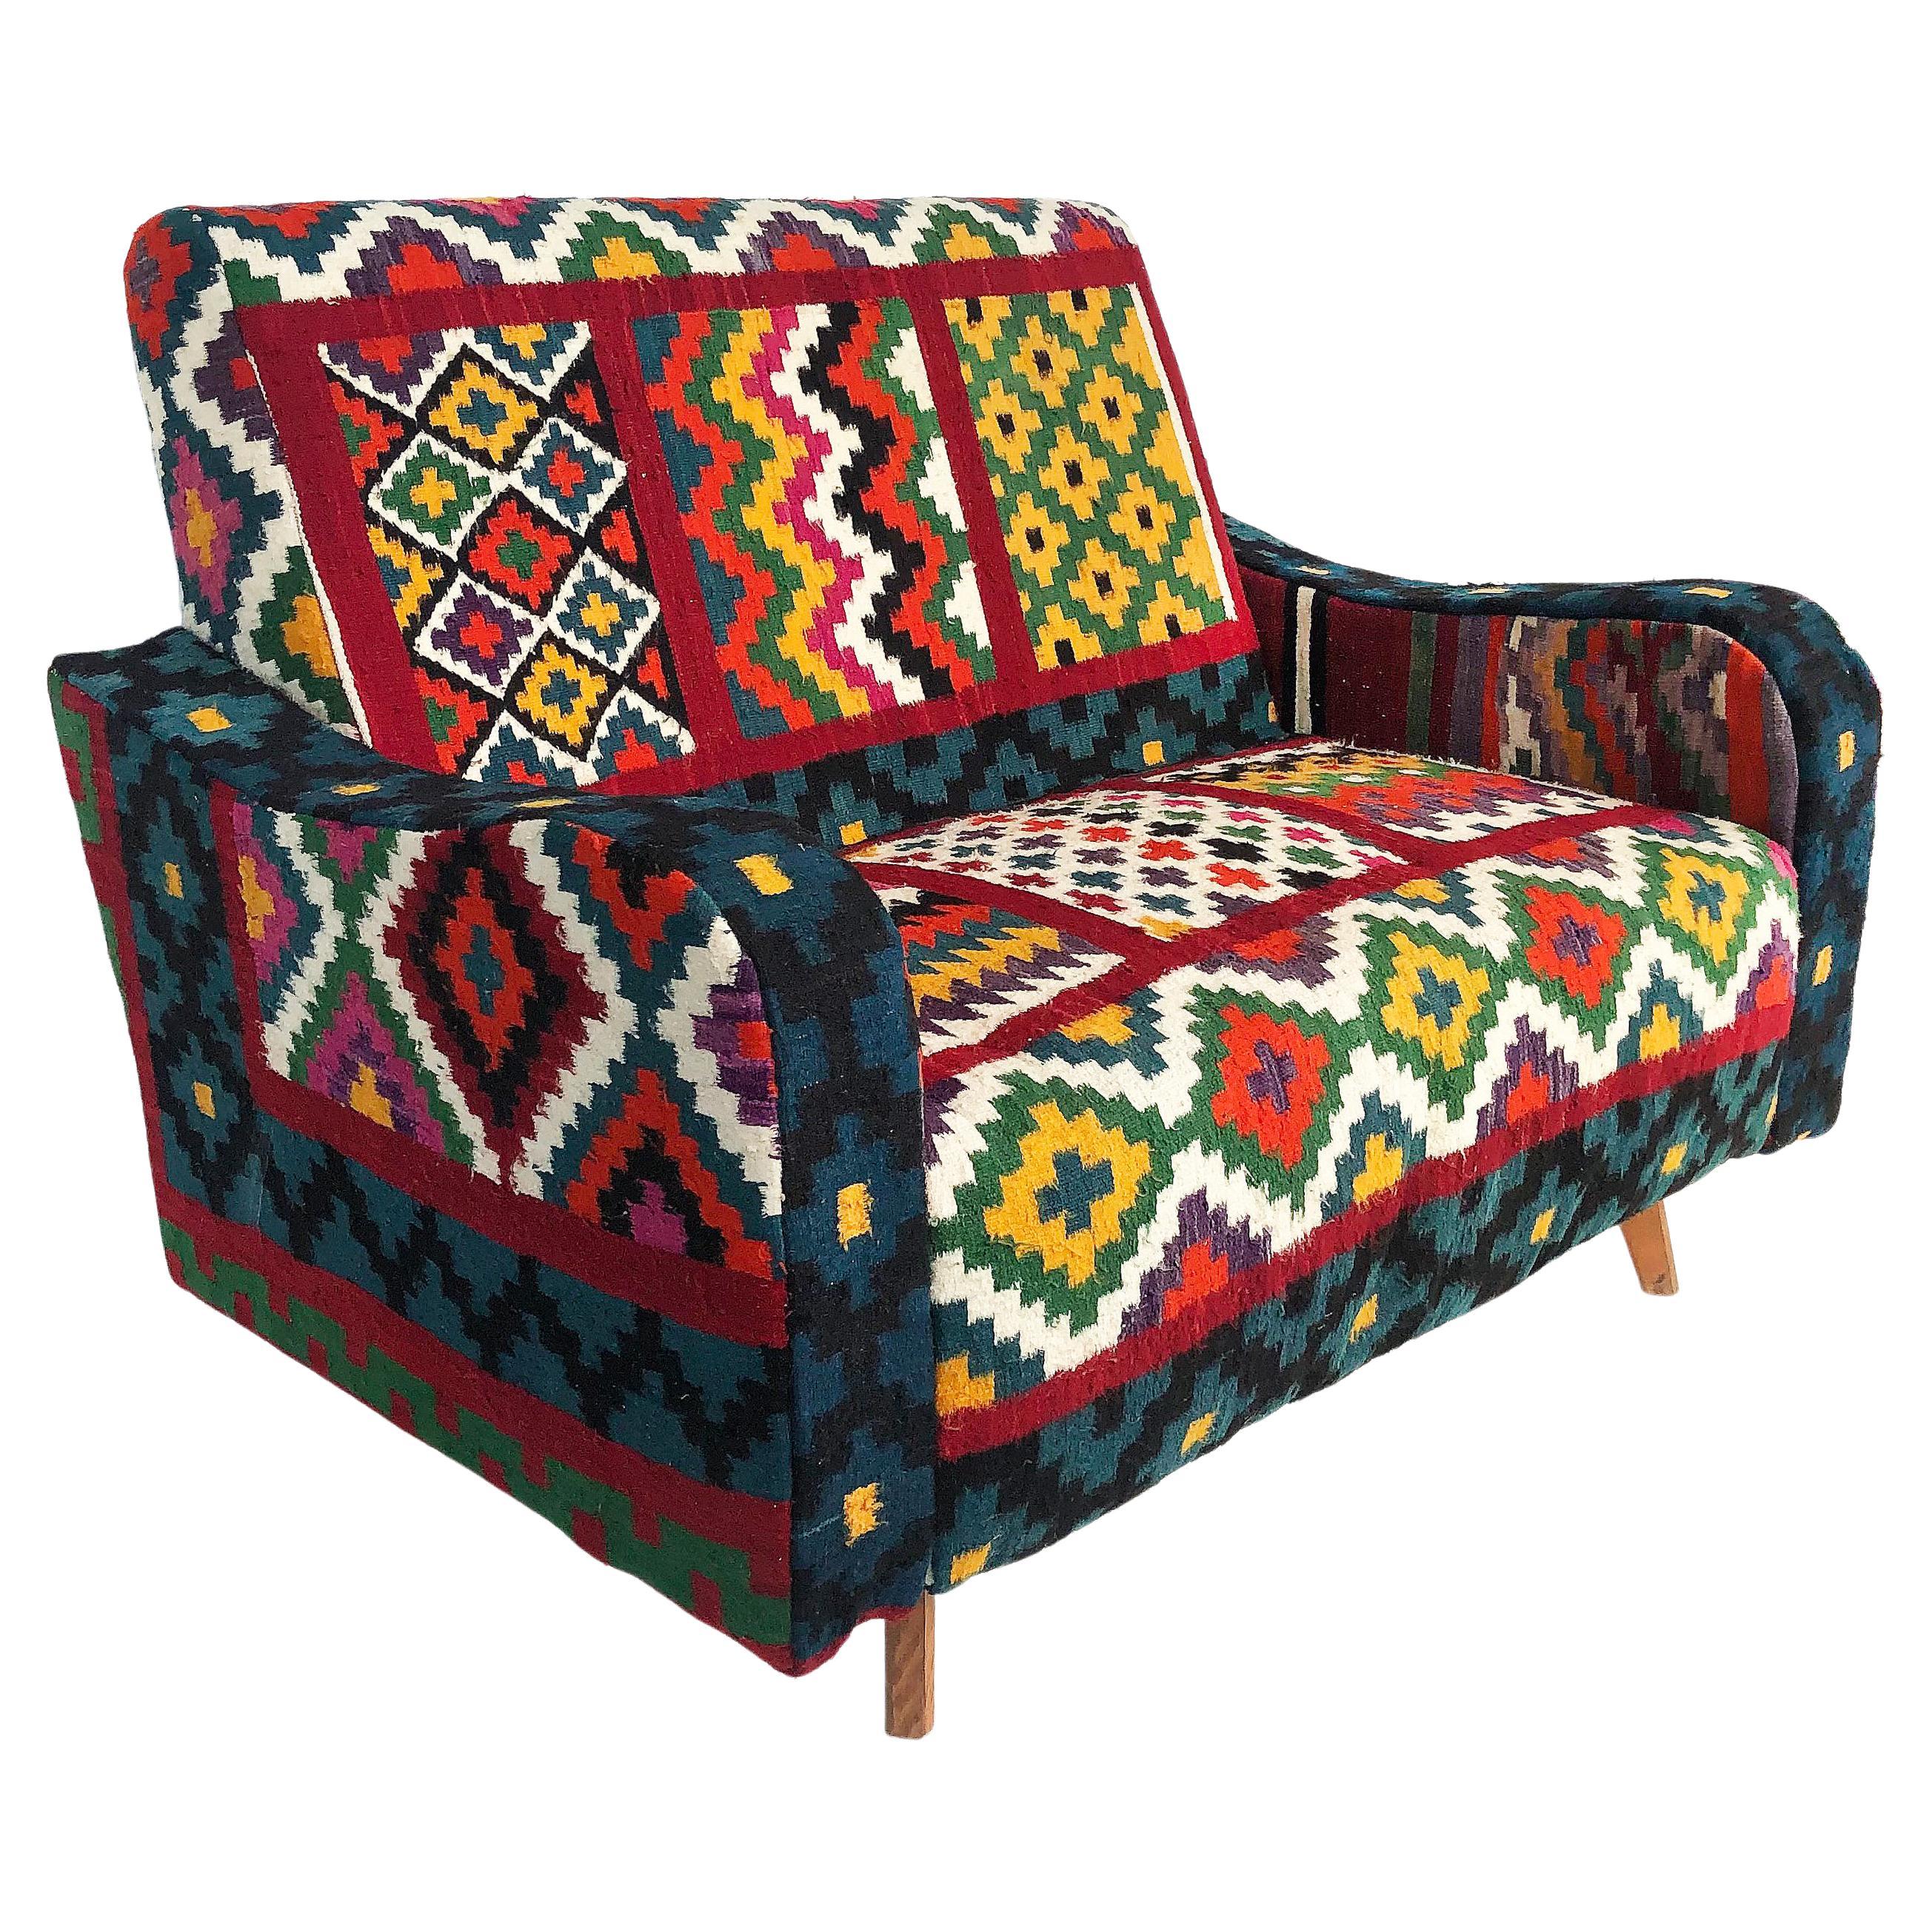 Tunisian 'North Africa' Woven Wool Textile Loveseat with Brightly Colored Fabric